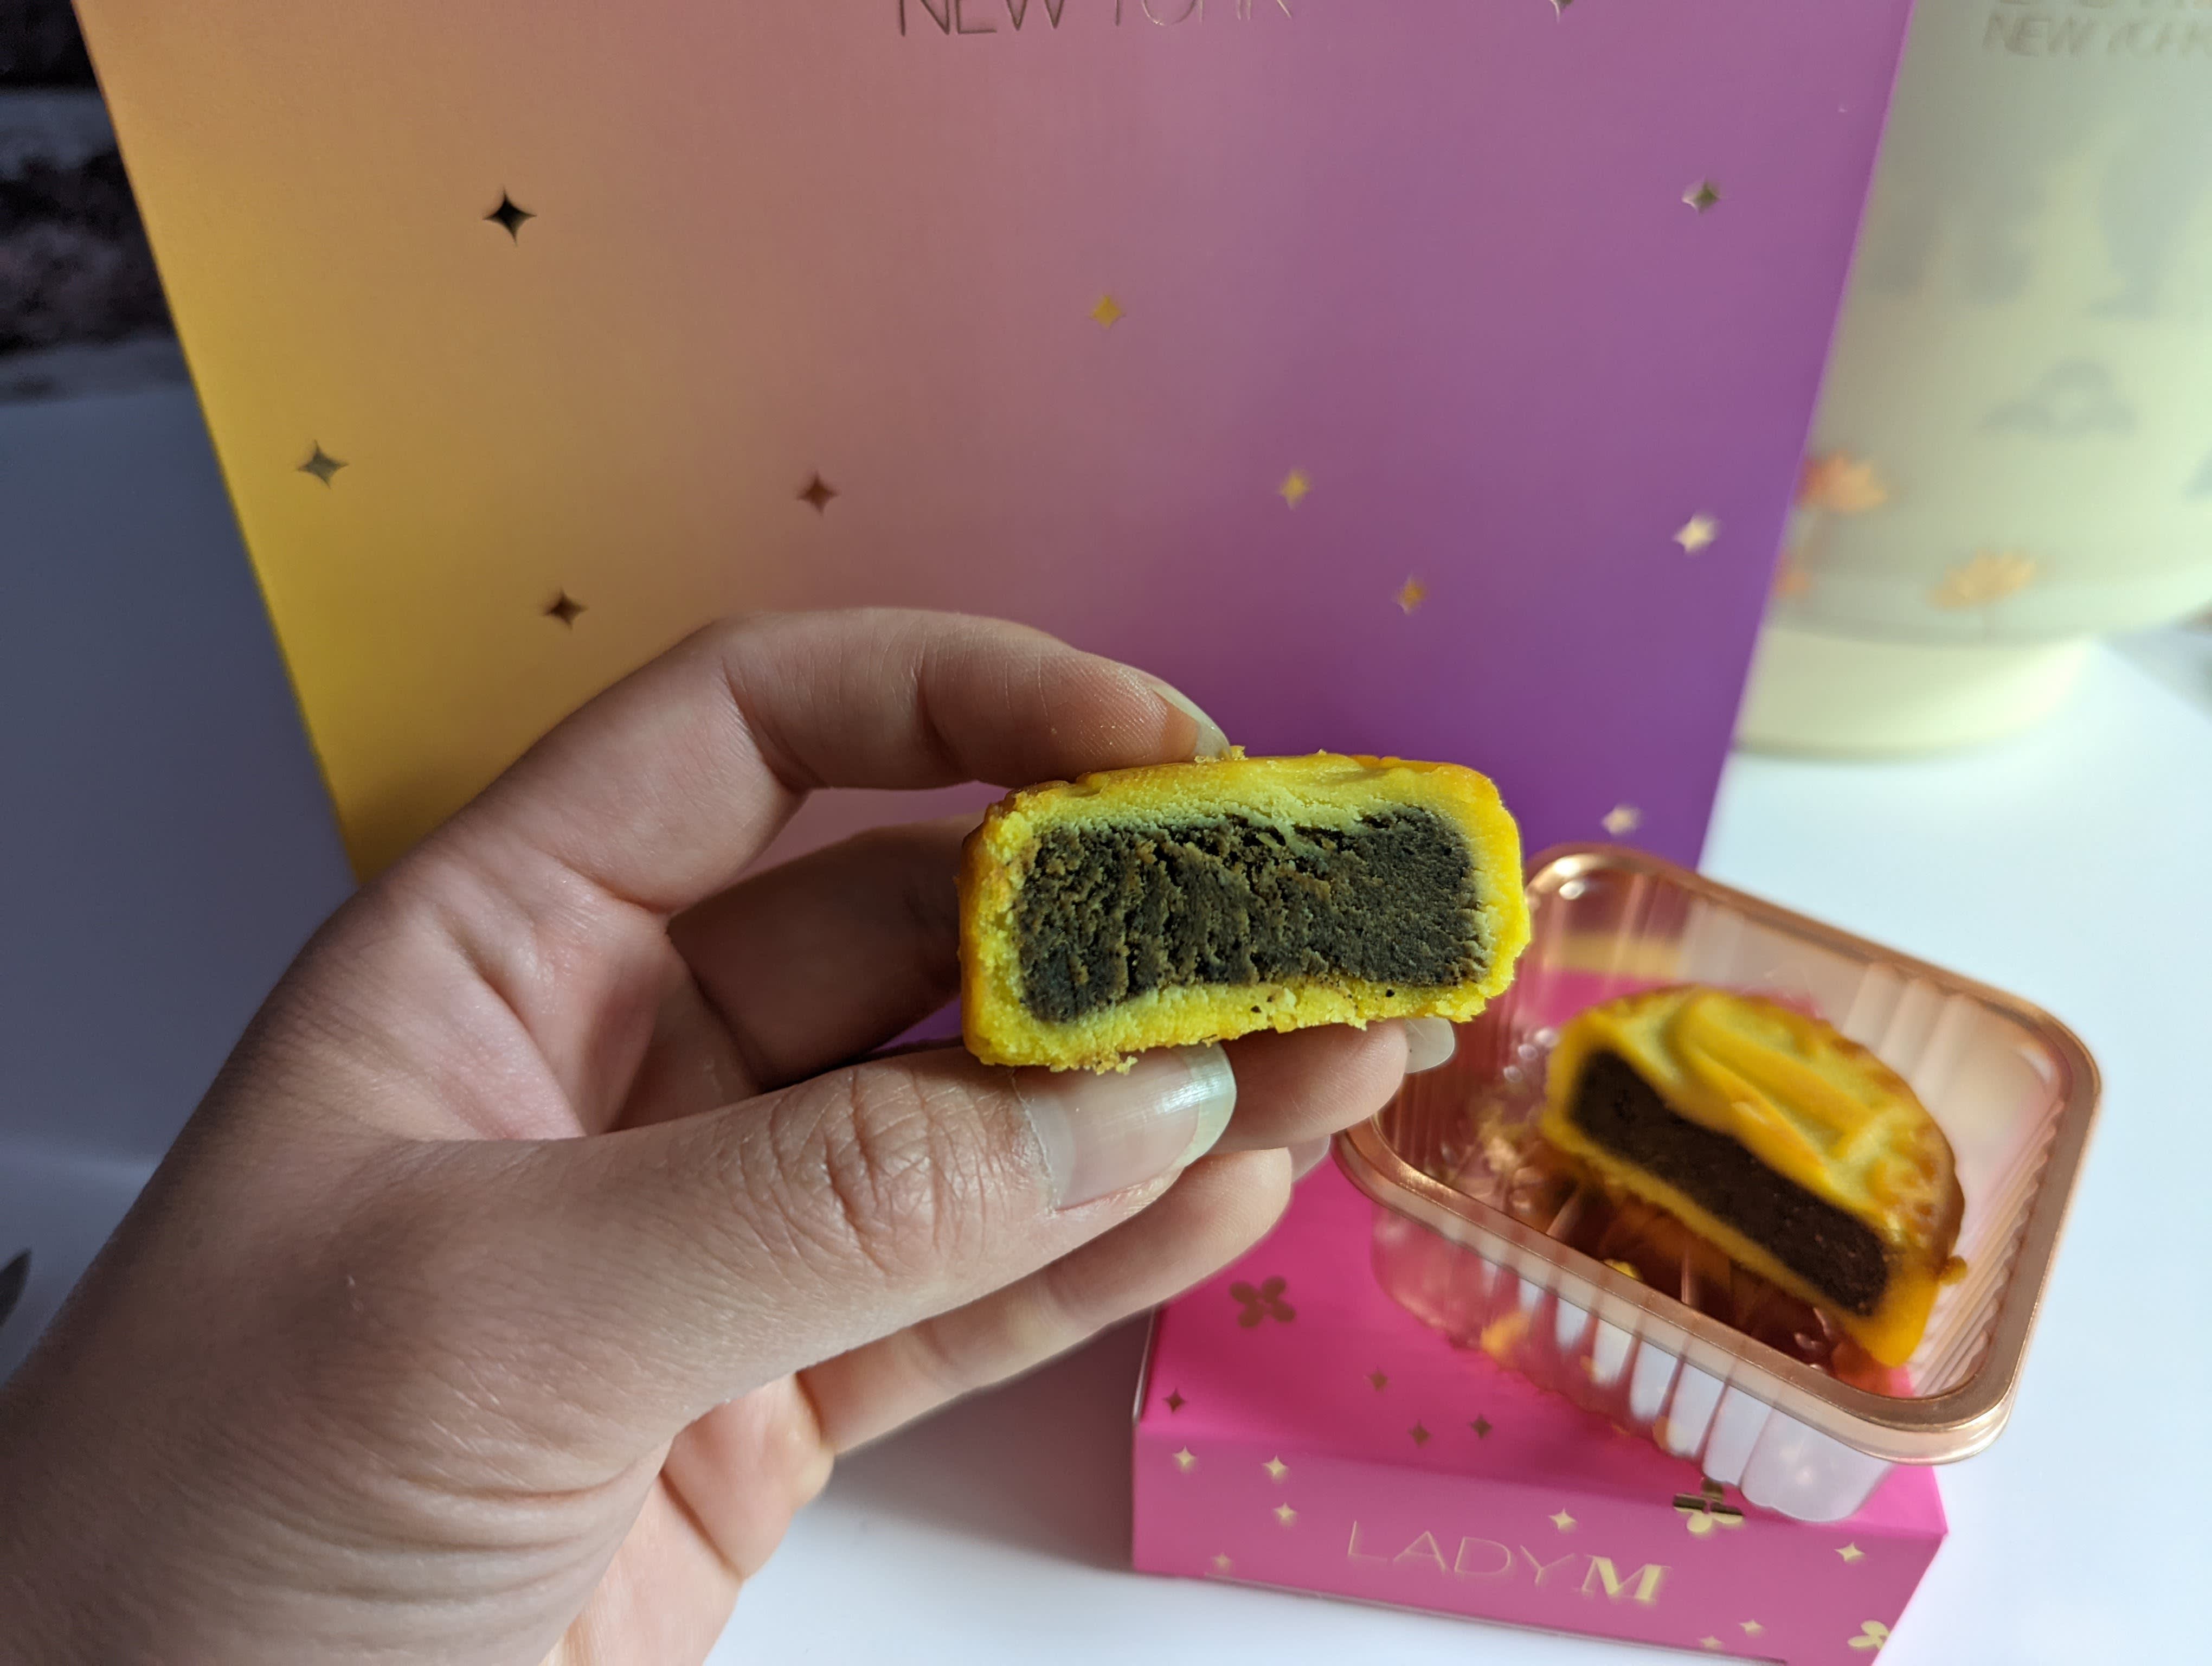 How Brands Use Chinese Mooncakes to Sell Luxury